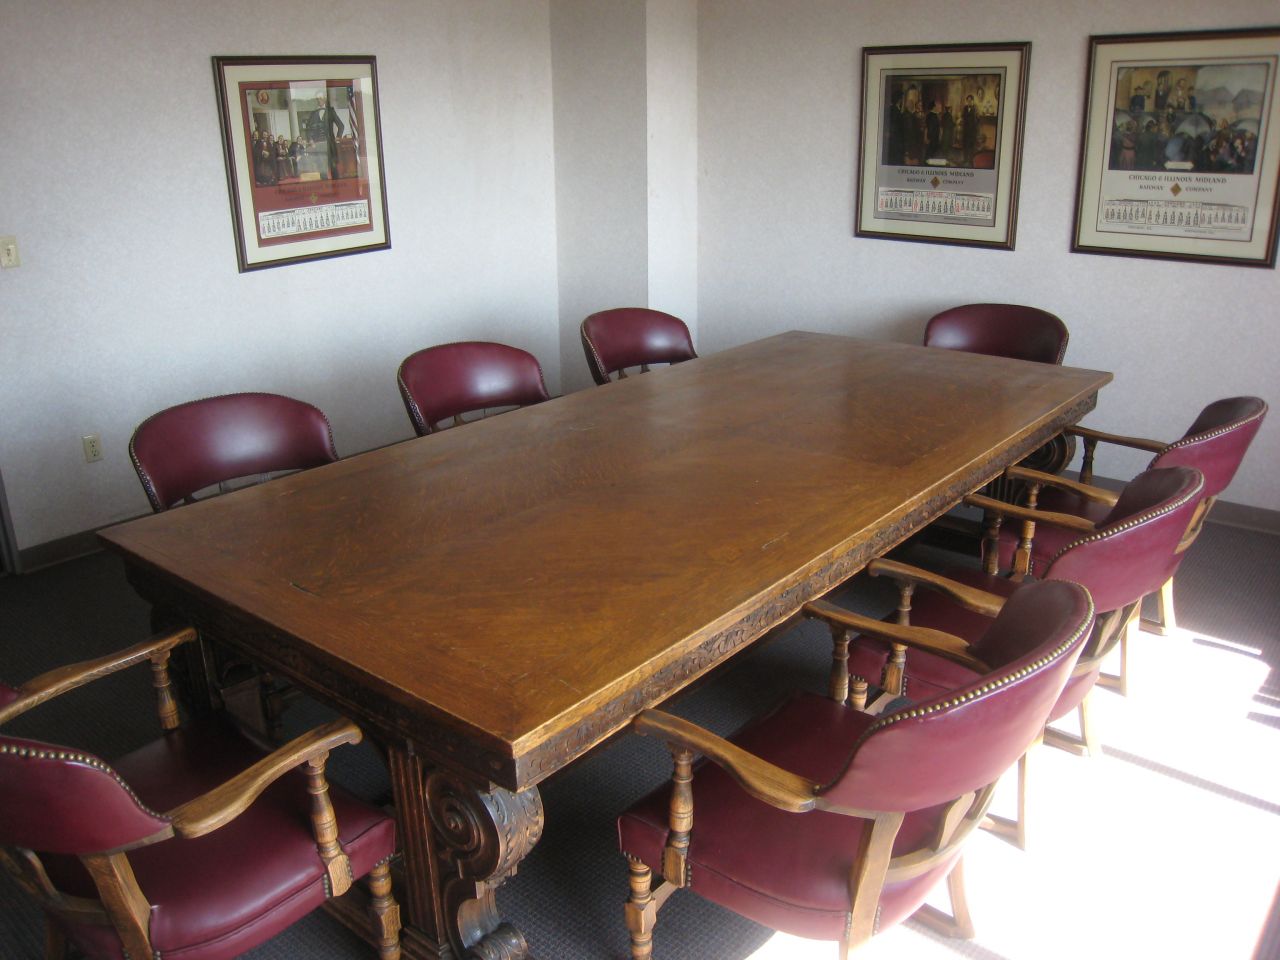 Abe Lincoln conference room